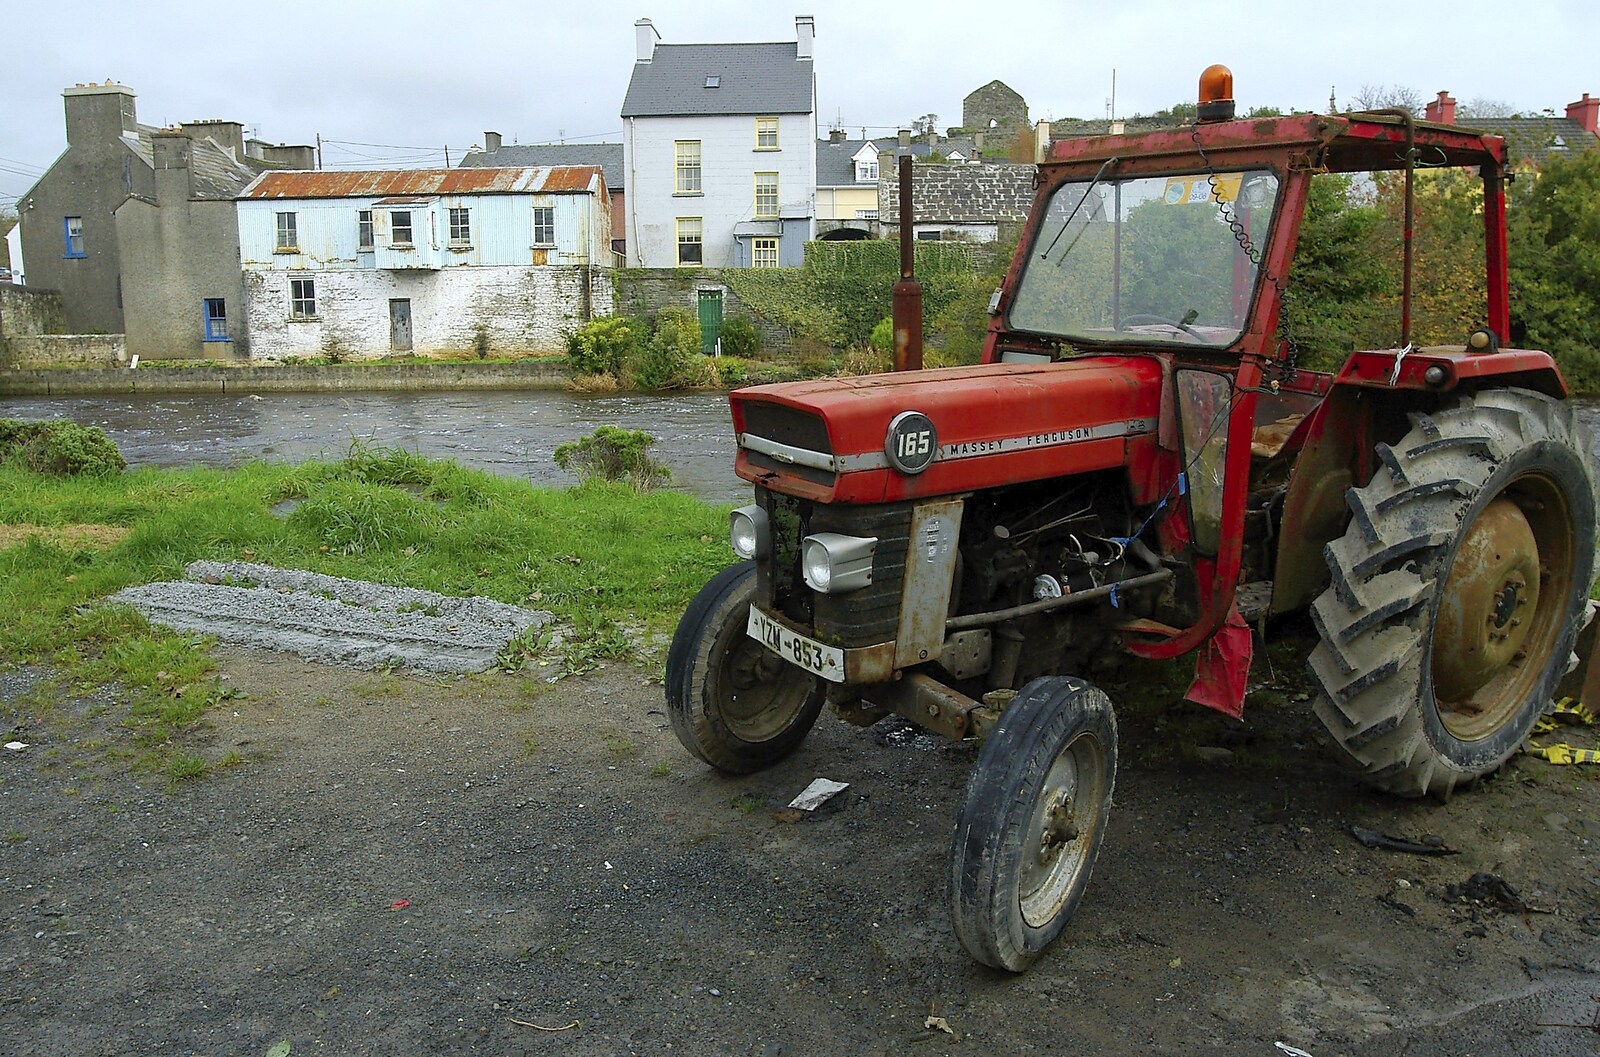 An abandoned Massey-Ferguson 165 tractor from Corofin, Ennistymon and The Burran, County Clare, Western Ireland - 27th October 2006